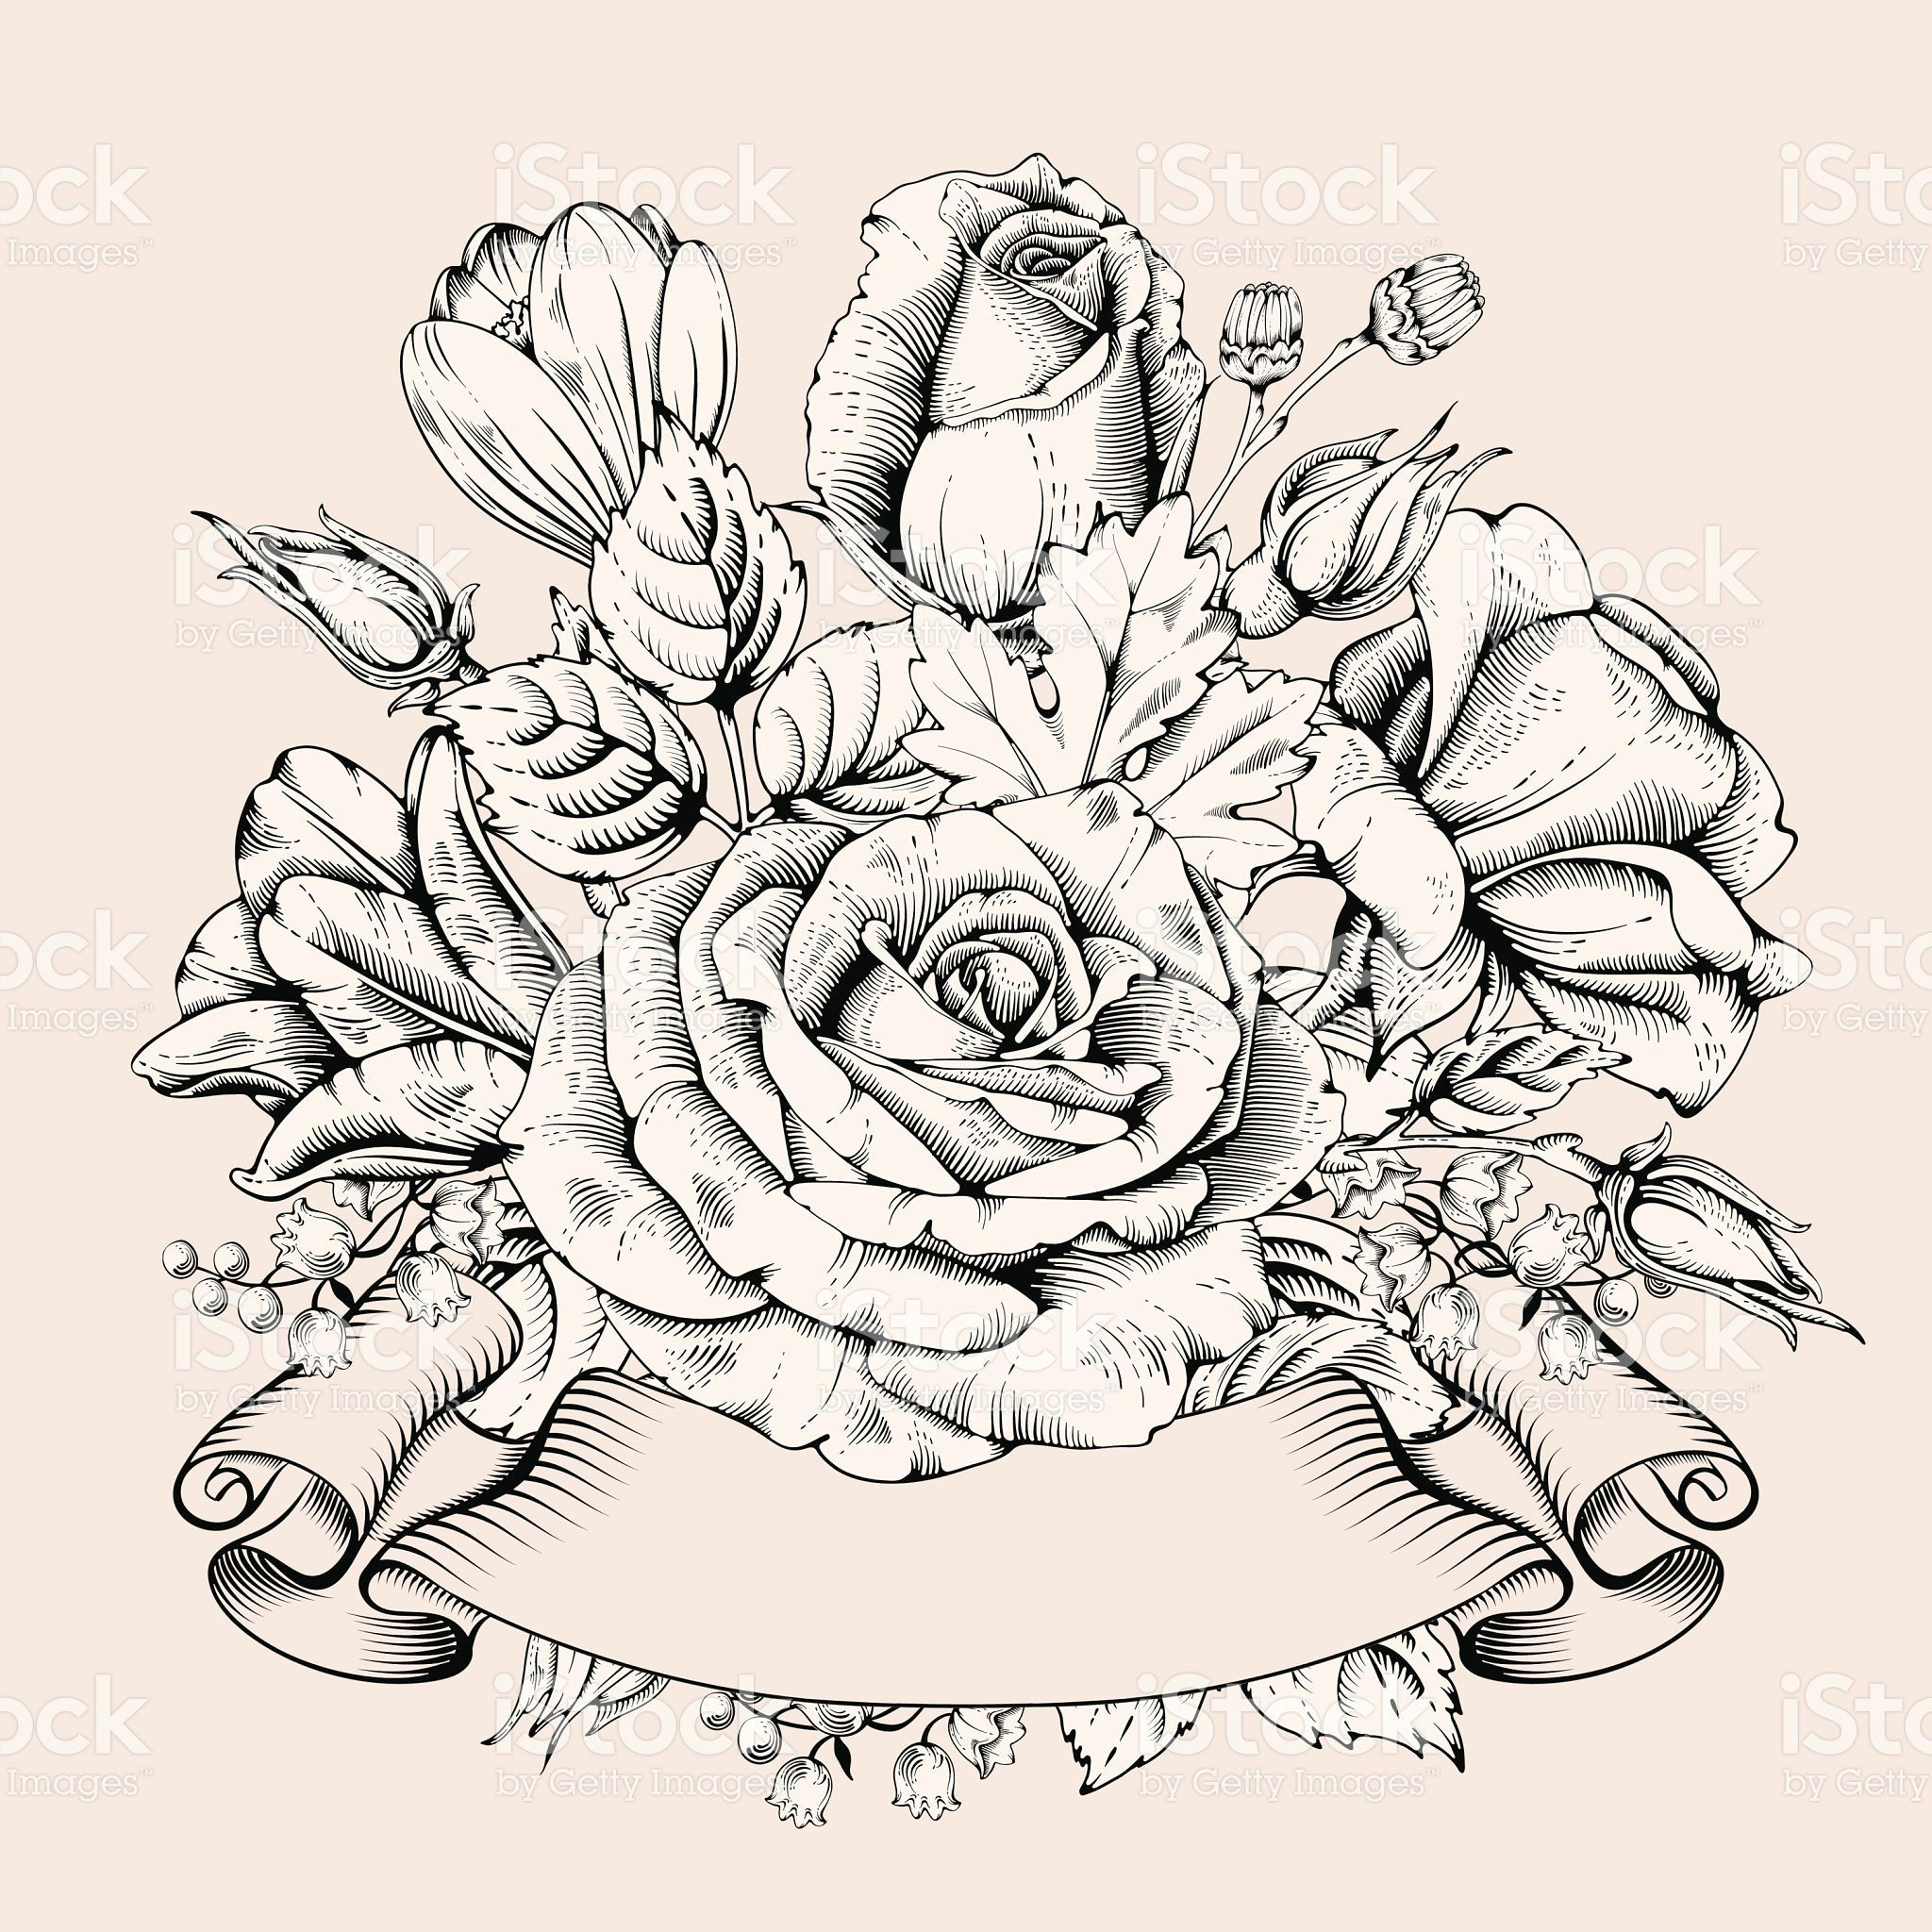 Free Drawings Of Roses Vintage Luxury Card with Detailed Hand Drawn Flowers Blooming Rose